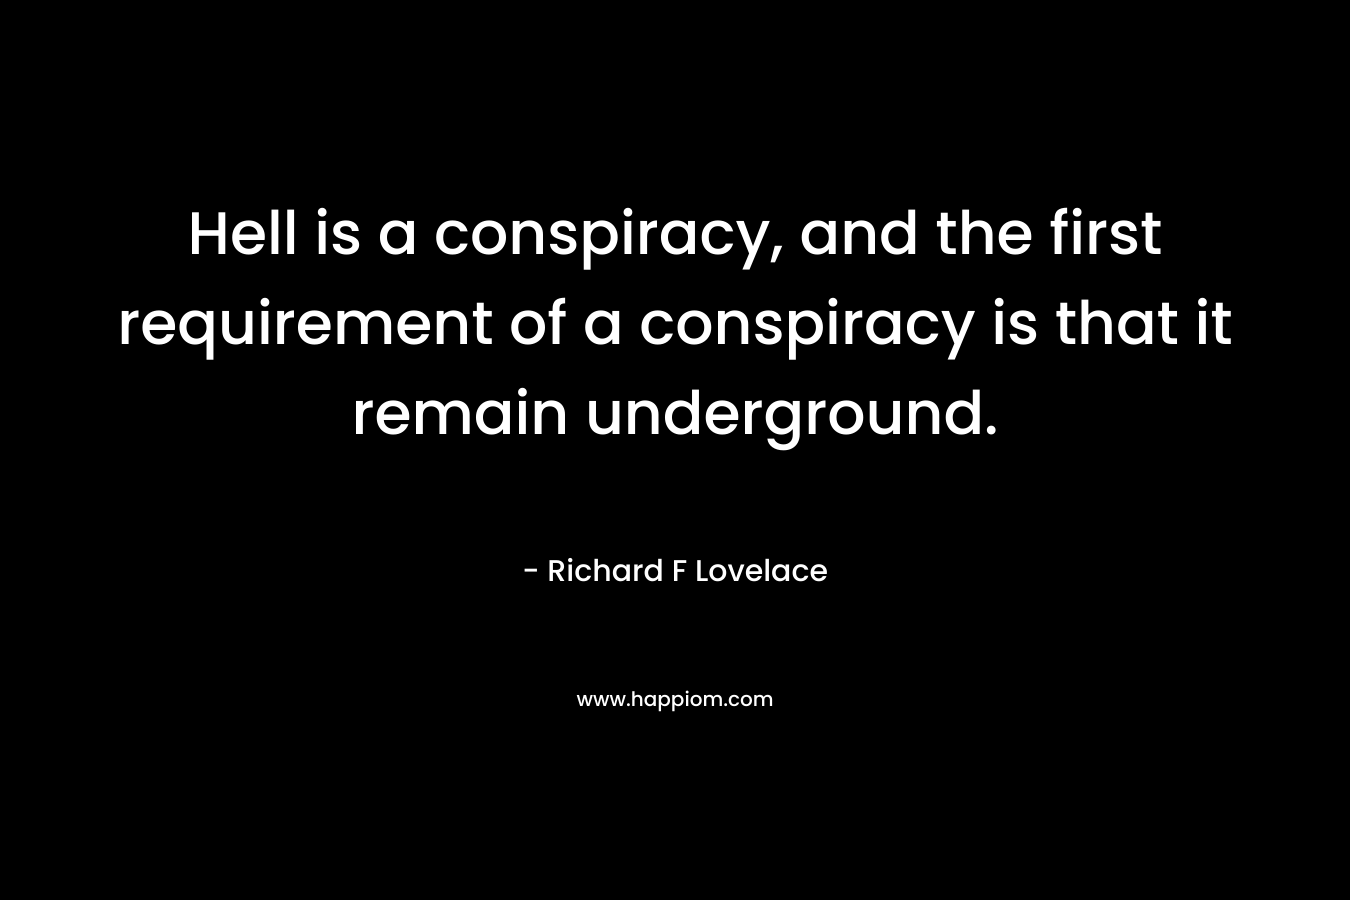 Hell is a conspiracy, and the first requirement of a conspiracy is that it remain underground. – Richard F Lovelace